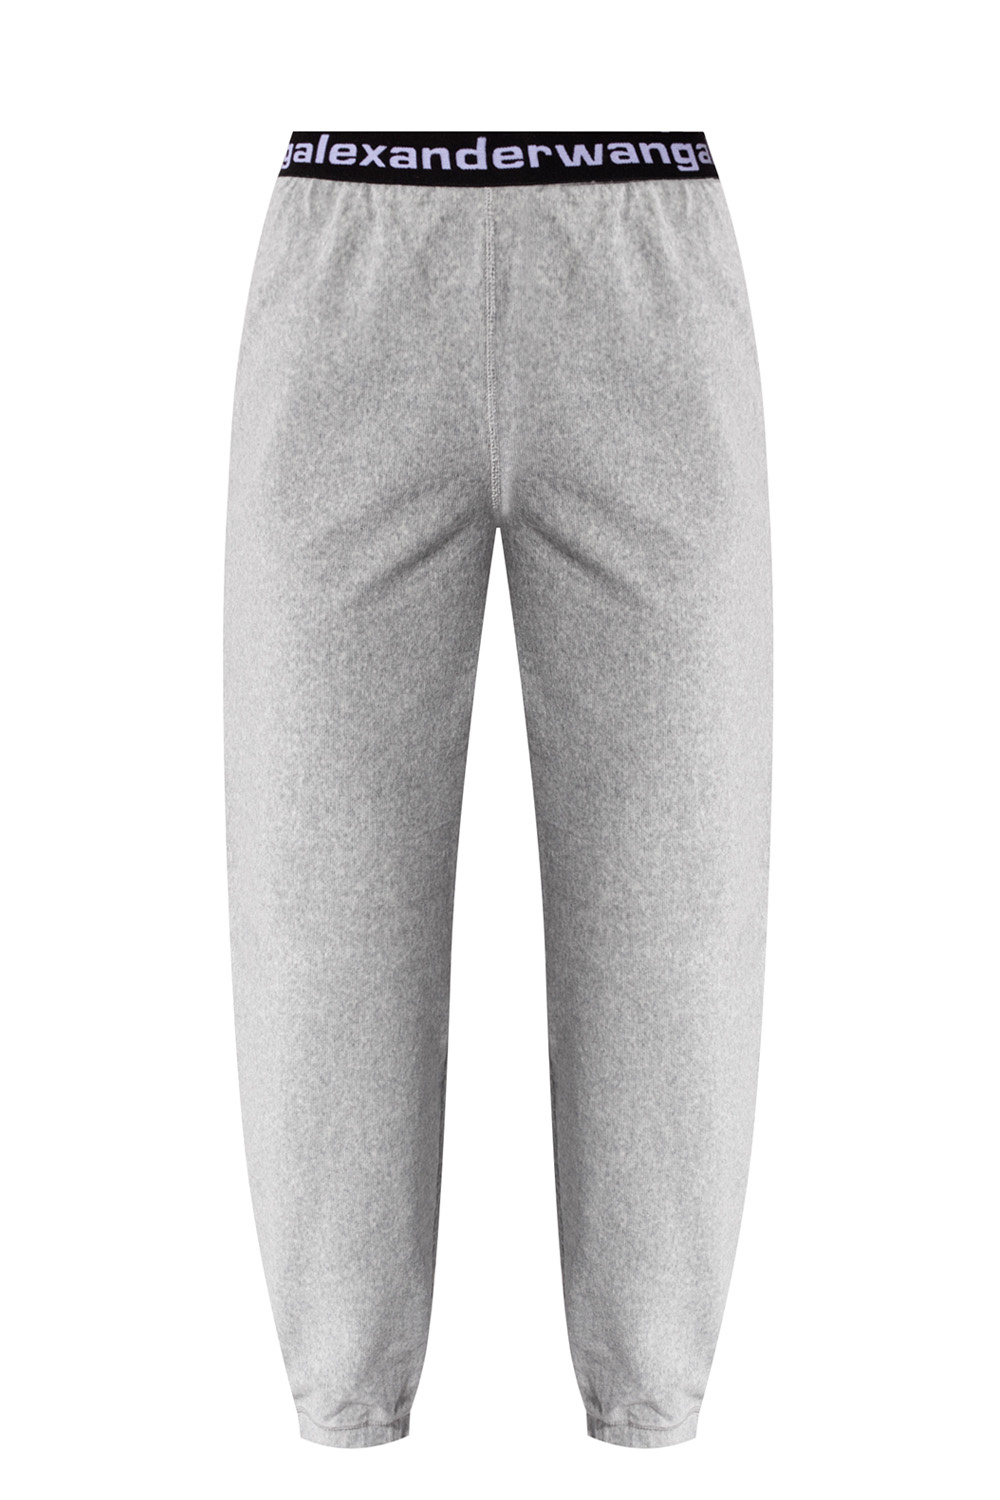 T by Alexander Wang sweatpants with logo kenzo moschino trousers